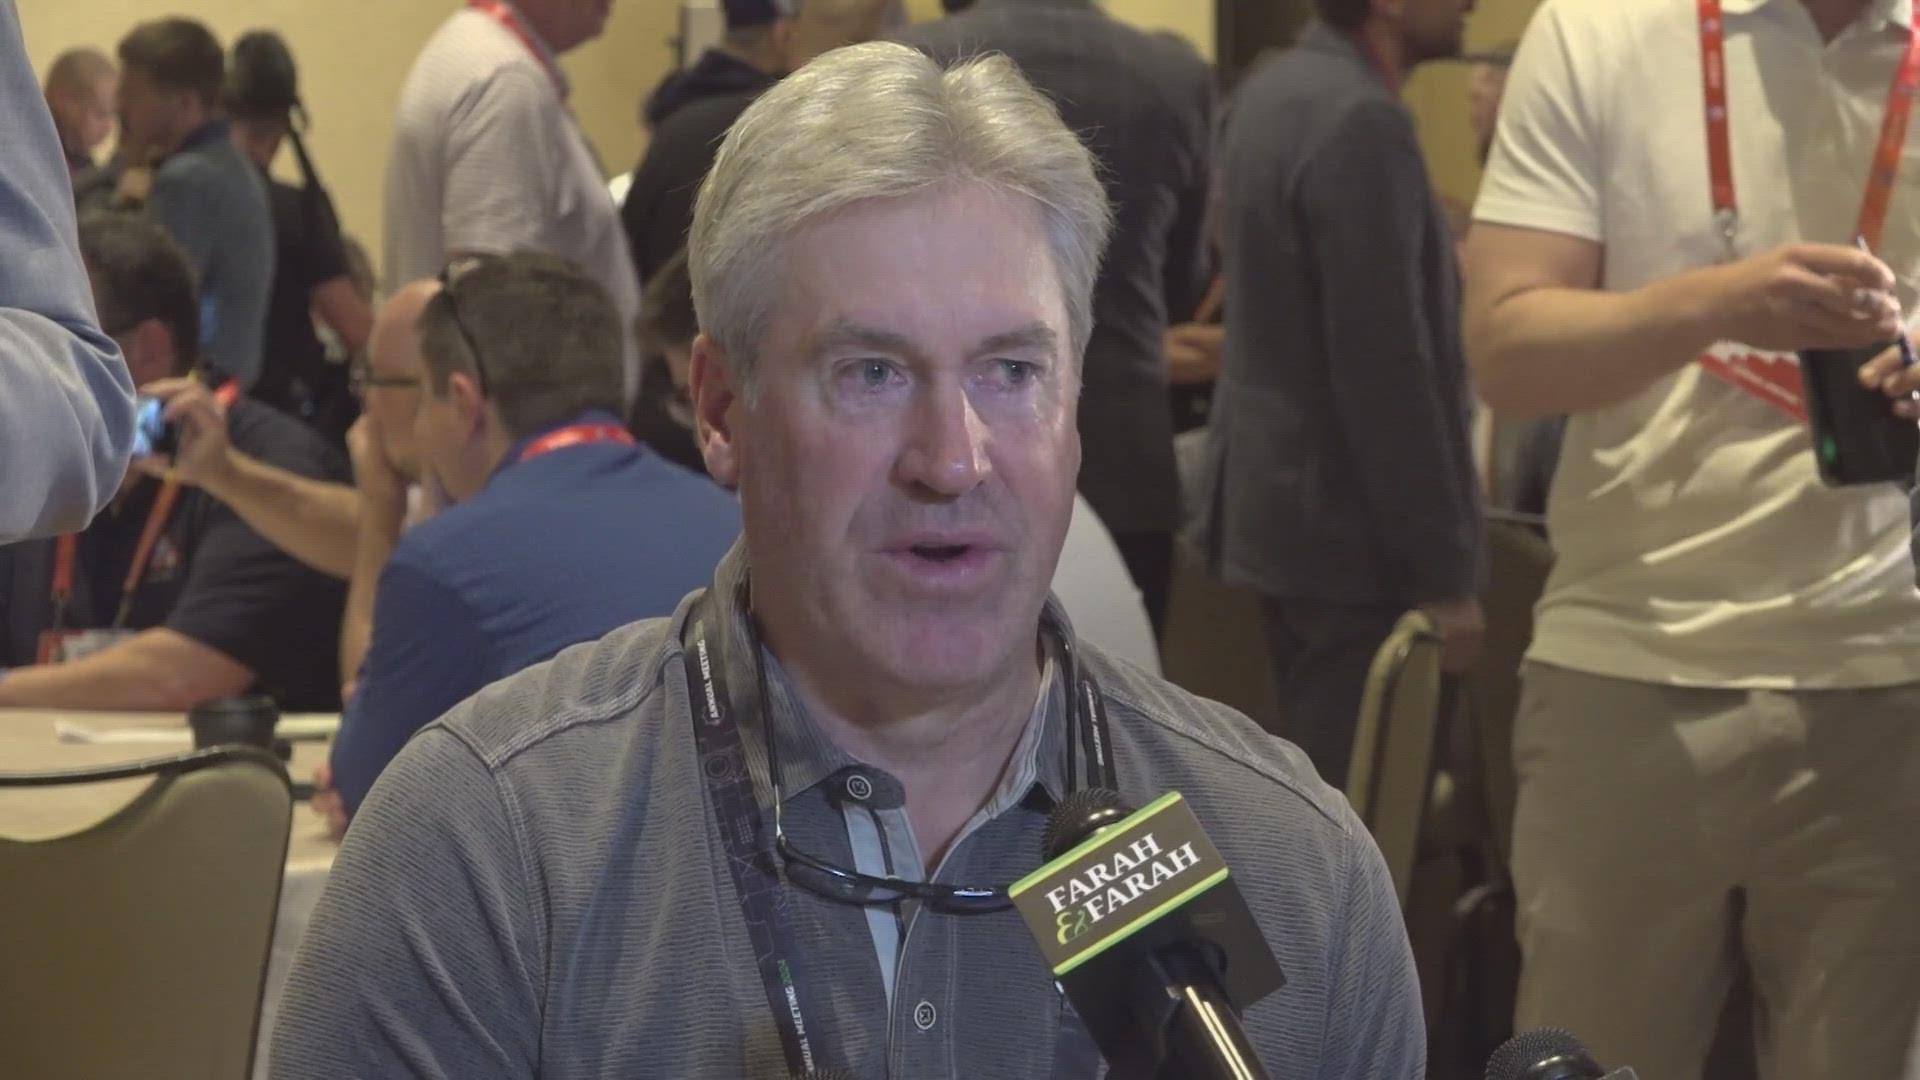 In terms of roster development, Pederson expressed confidence in the addition of free agents such as offensive lineman Mitch Morse and defensive end Arik Armstead.